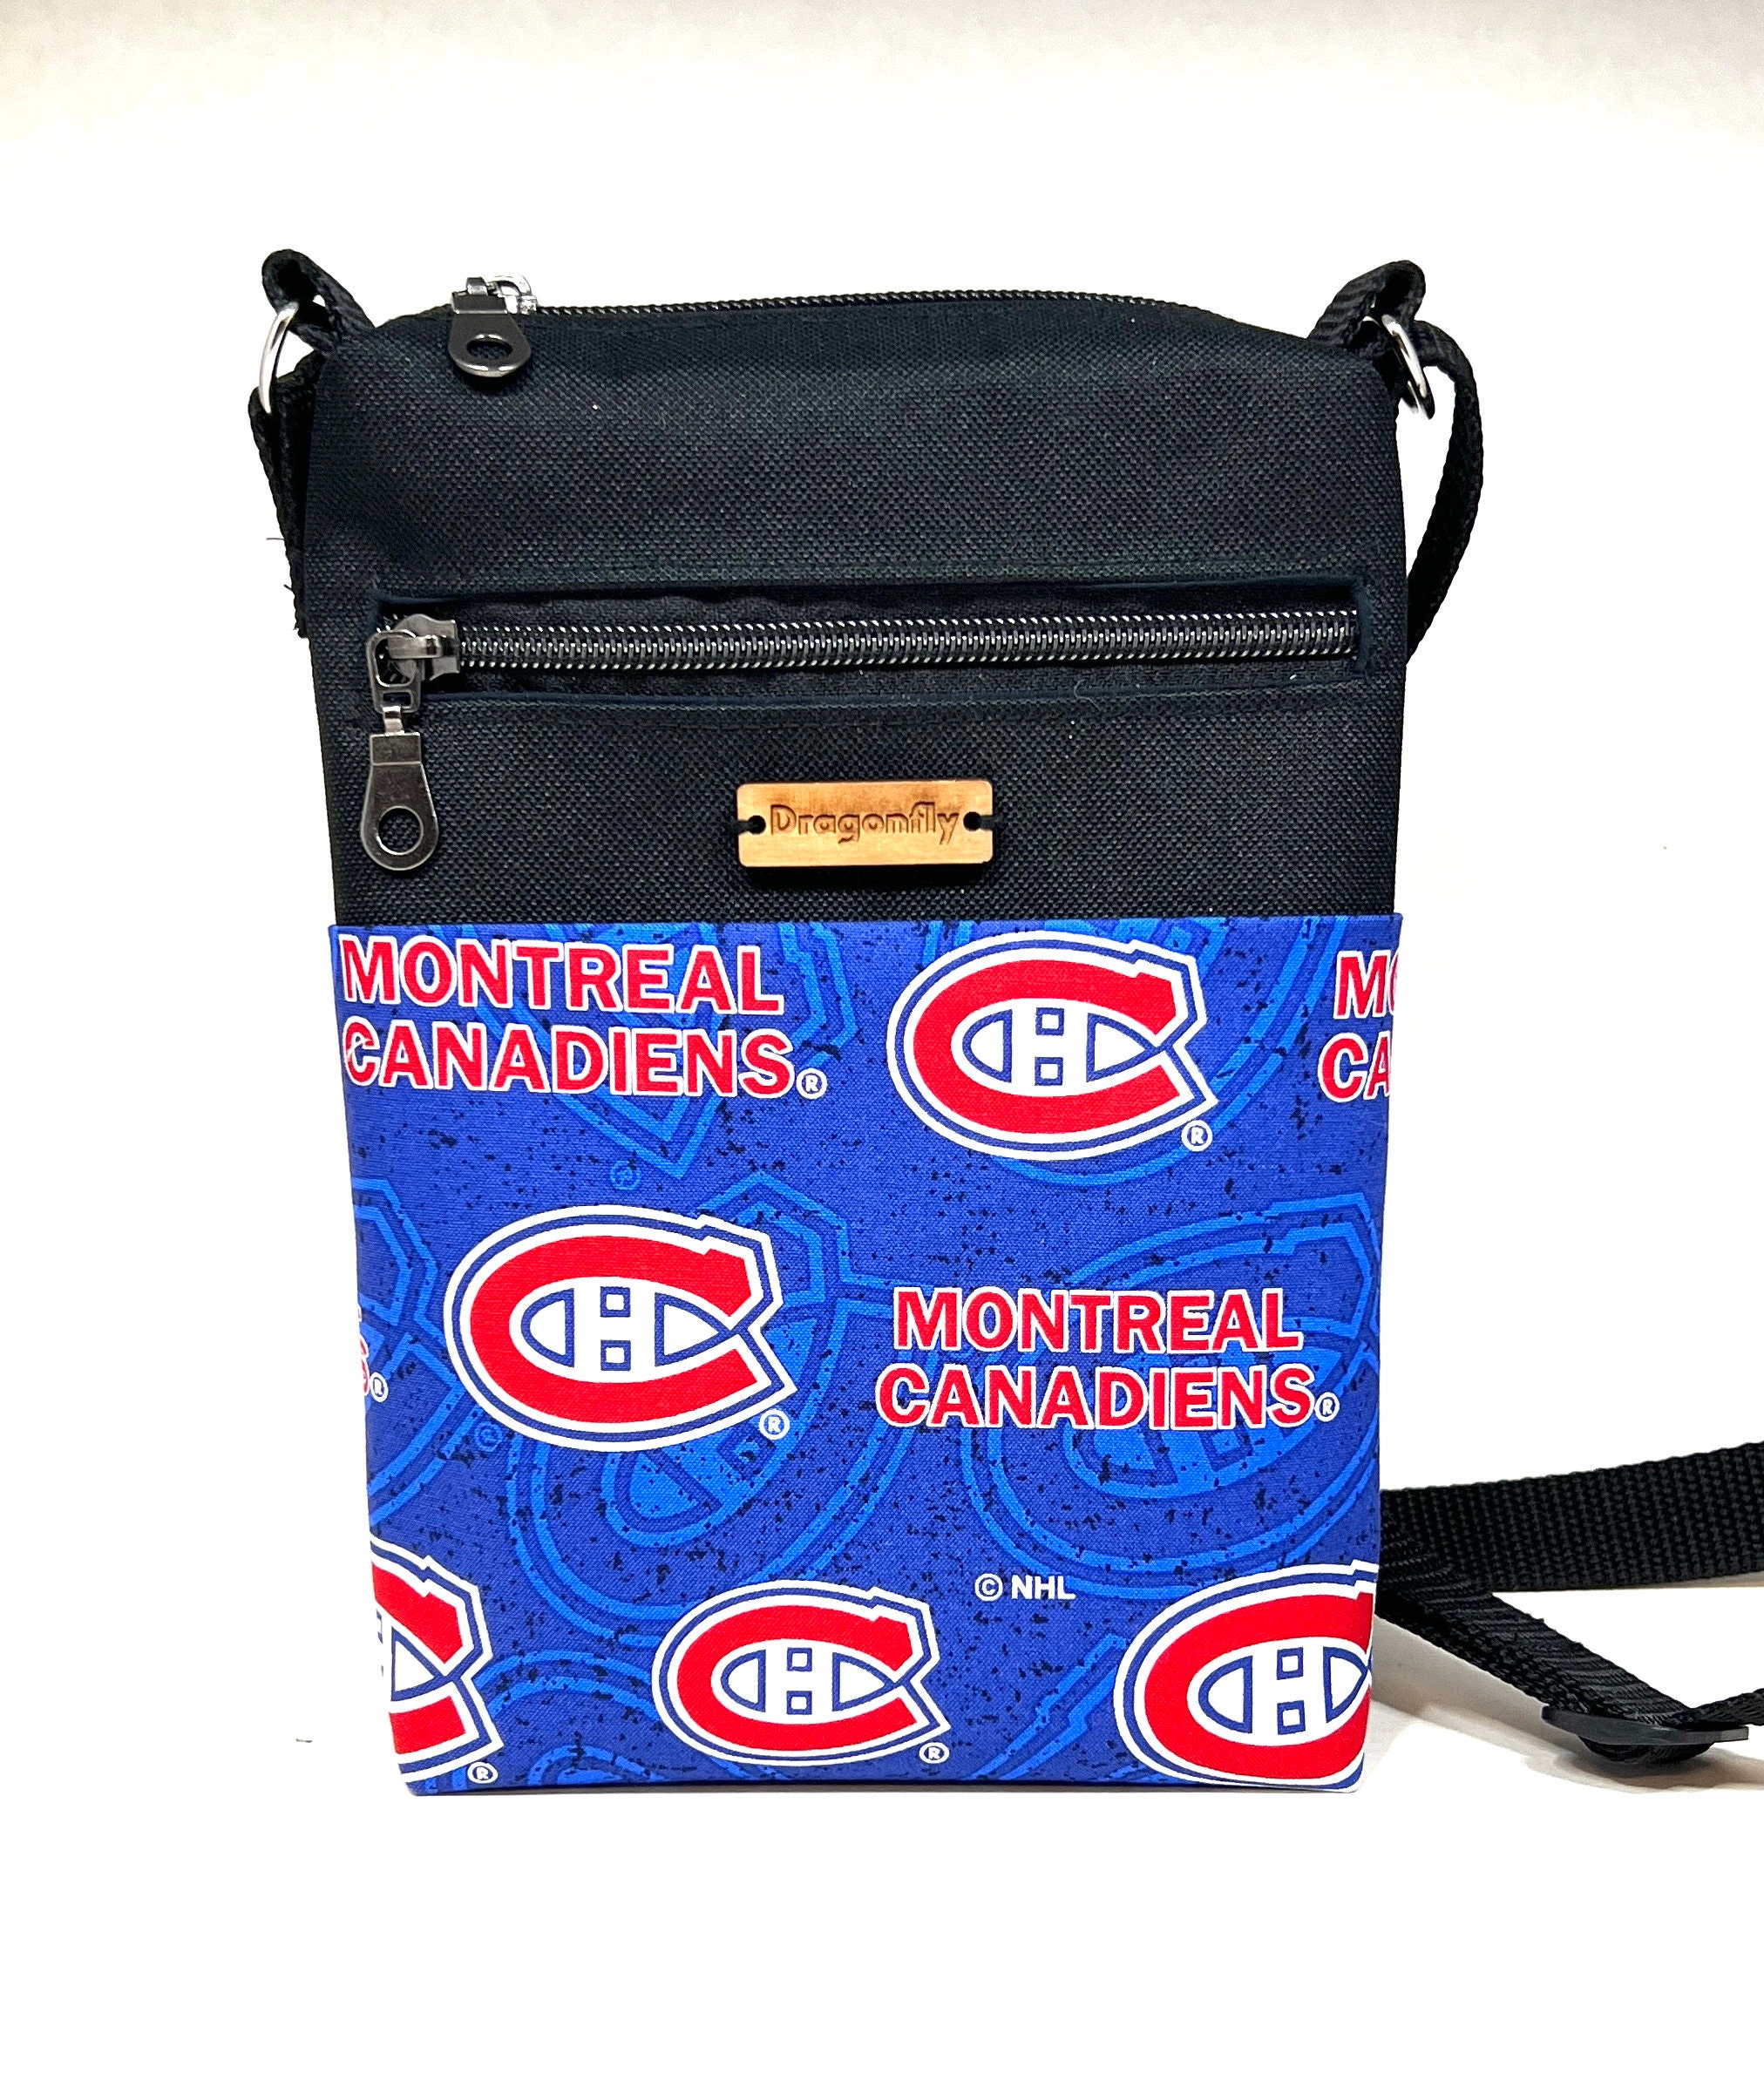 NHL Montreal Canadiens Adjustable Crossbody Bag over the